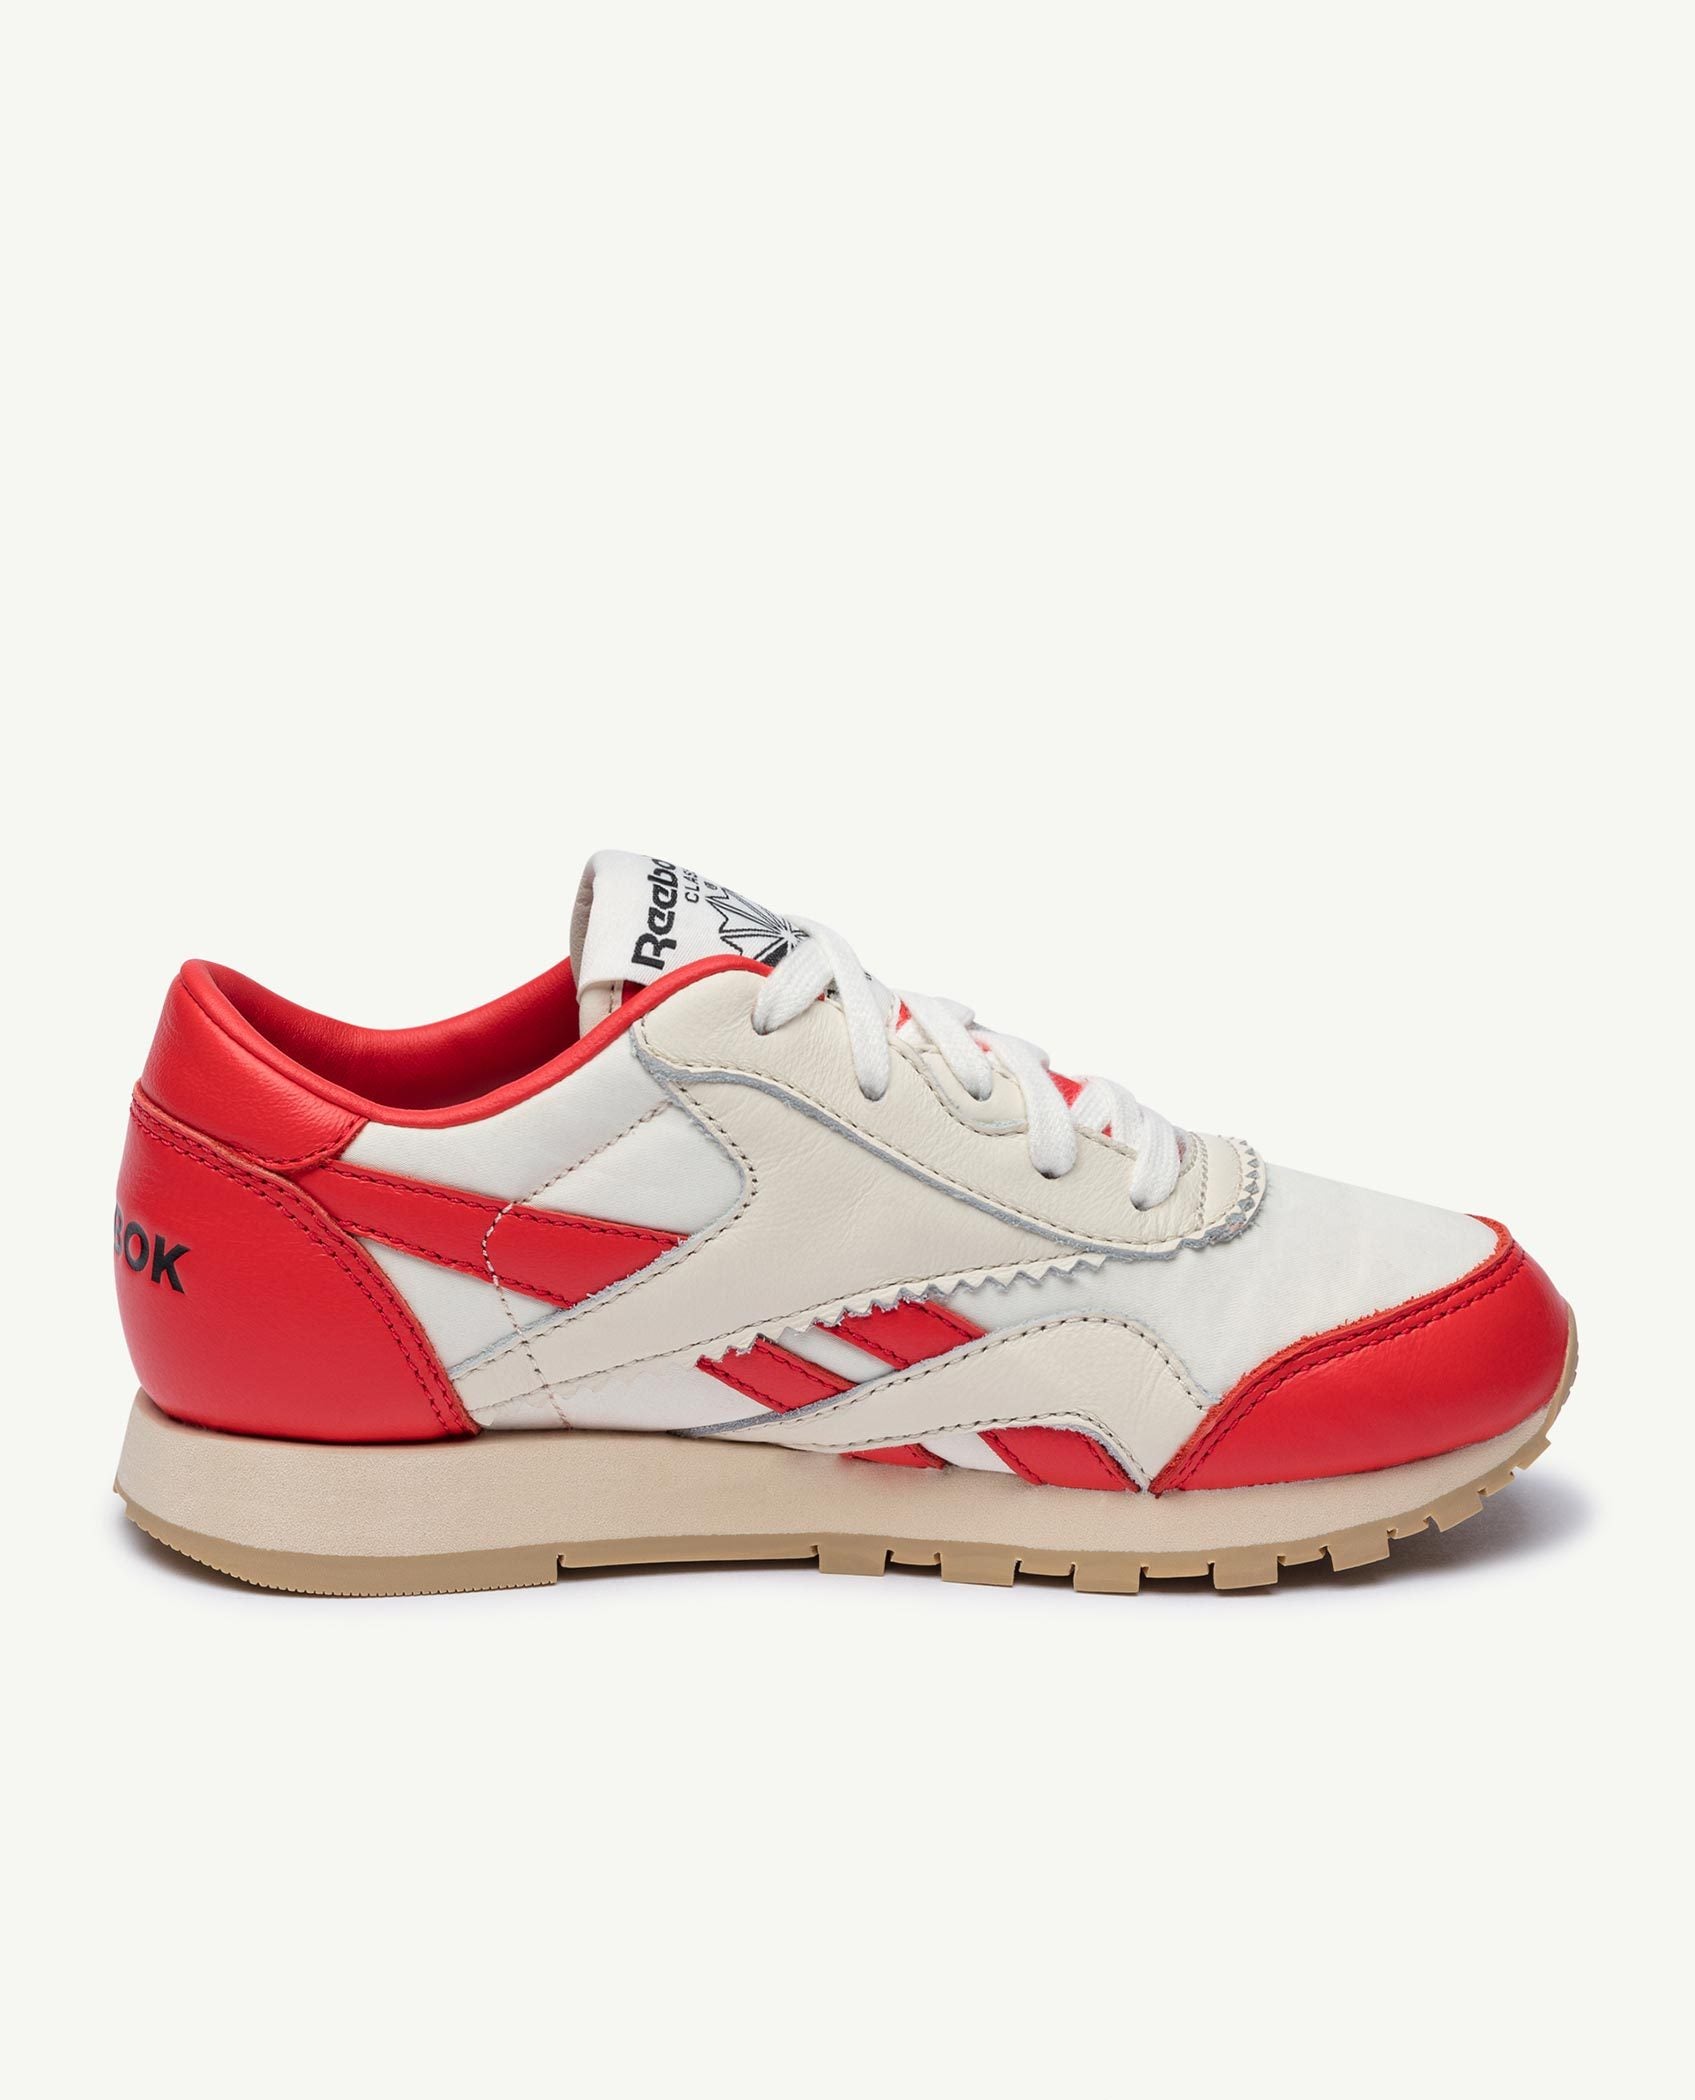 Reebok x The Animals Observatory Classic Nylon Red Kid PRODUCT BACK